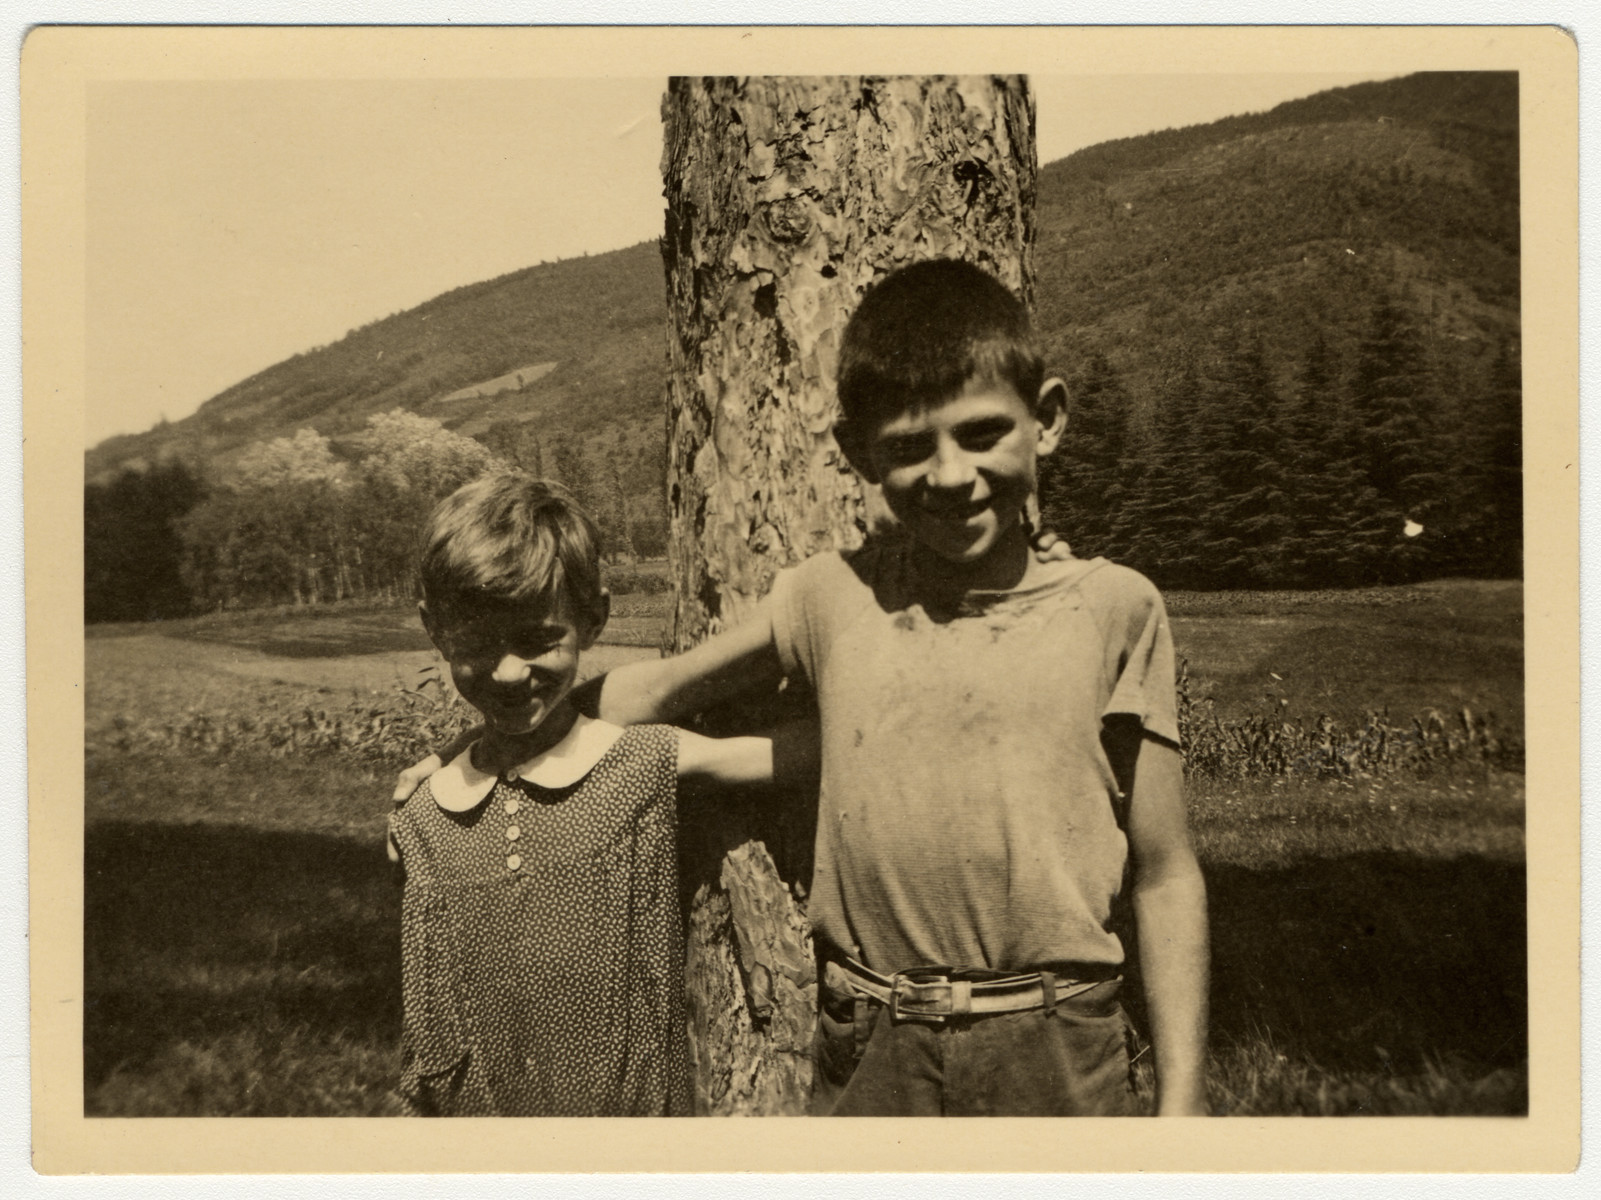 Rosa and Max Krolik pose at the Chateau de la Hille. 

Both were brought to the USA in 1941 through the efforts of Mme. Lilly Felddegen as part of a group of 100 children rescued by the US Committee on European Children, chaired by Marshall Field.